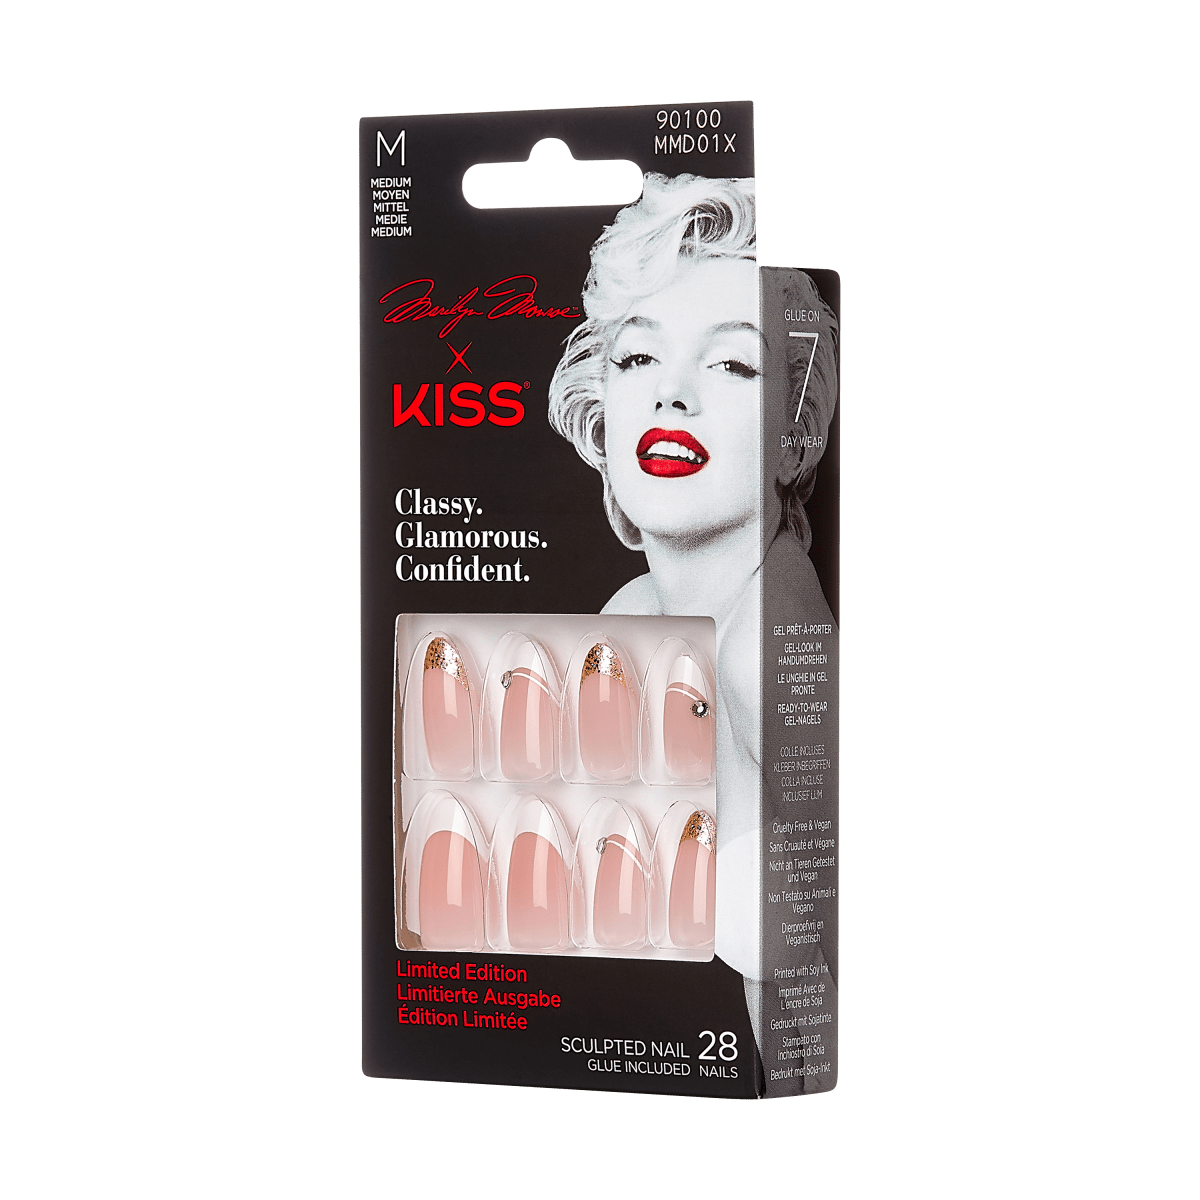 Marilyn Monroe x KISS Limited Edition Press-On Nails, White French, Medium Almond, 31 Ct.